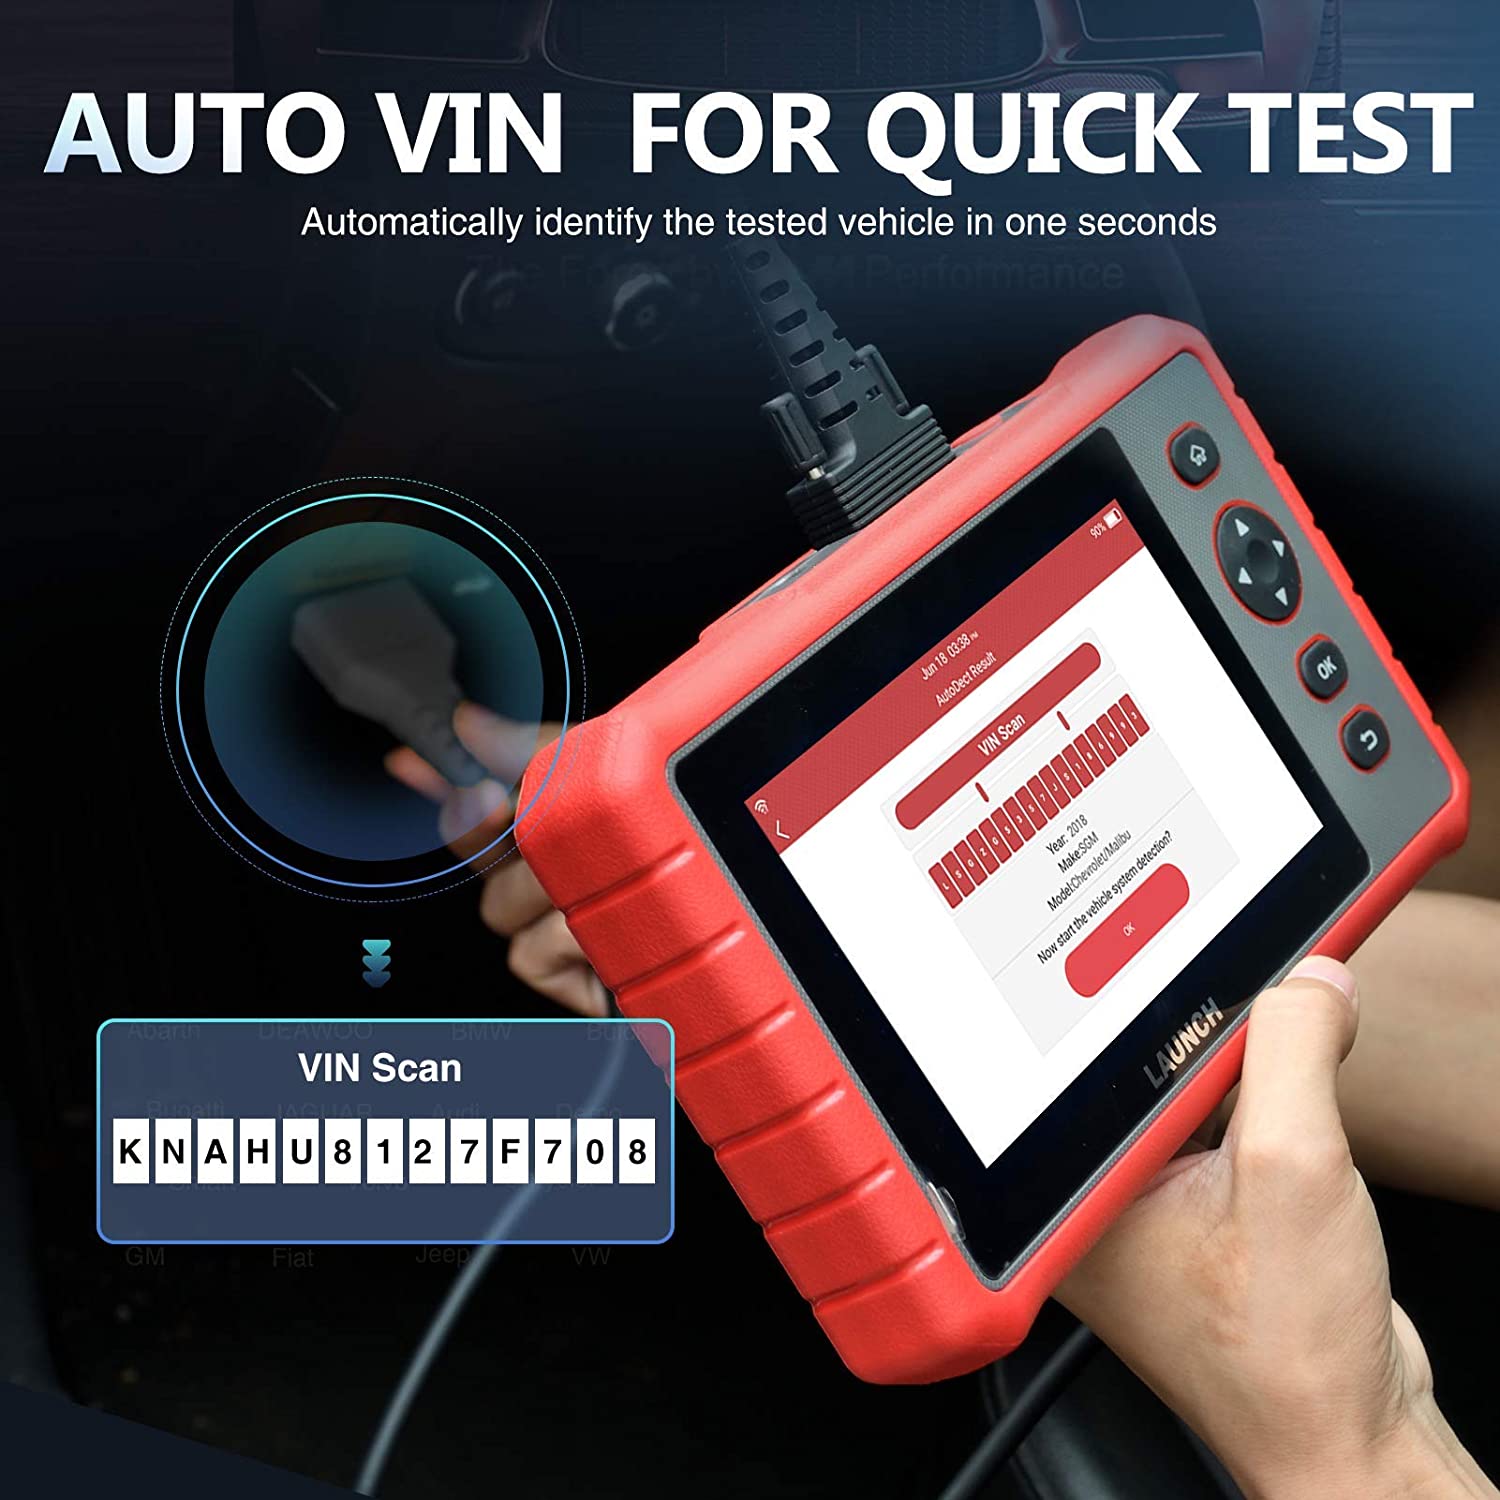 LAUNCH-X431-CRP909X-OBD2-Scanner-Full-System-Code-Reader-wifi-Diagnostic-Tool-OBD-Automotive-Tool-TPMS-IMMO-Diagnostic-Scanner-4001139239381